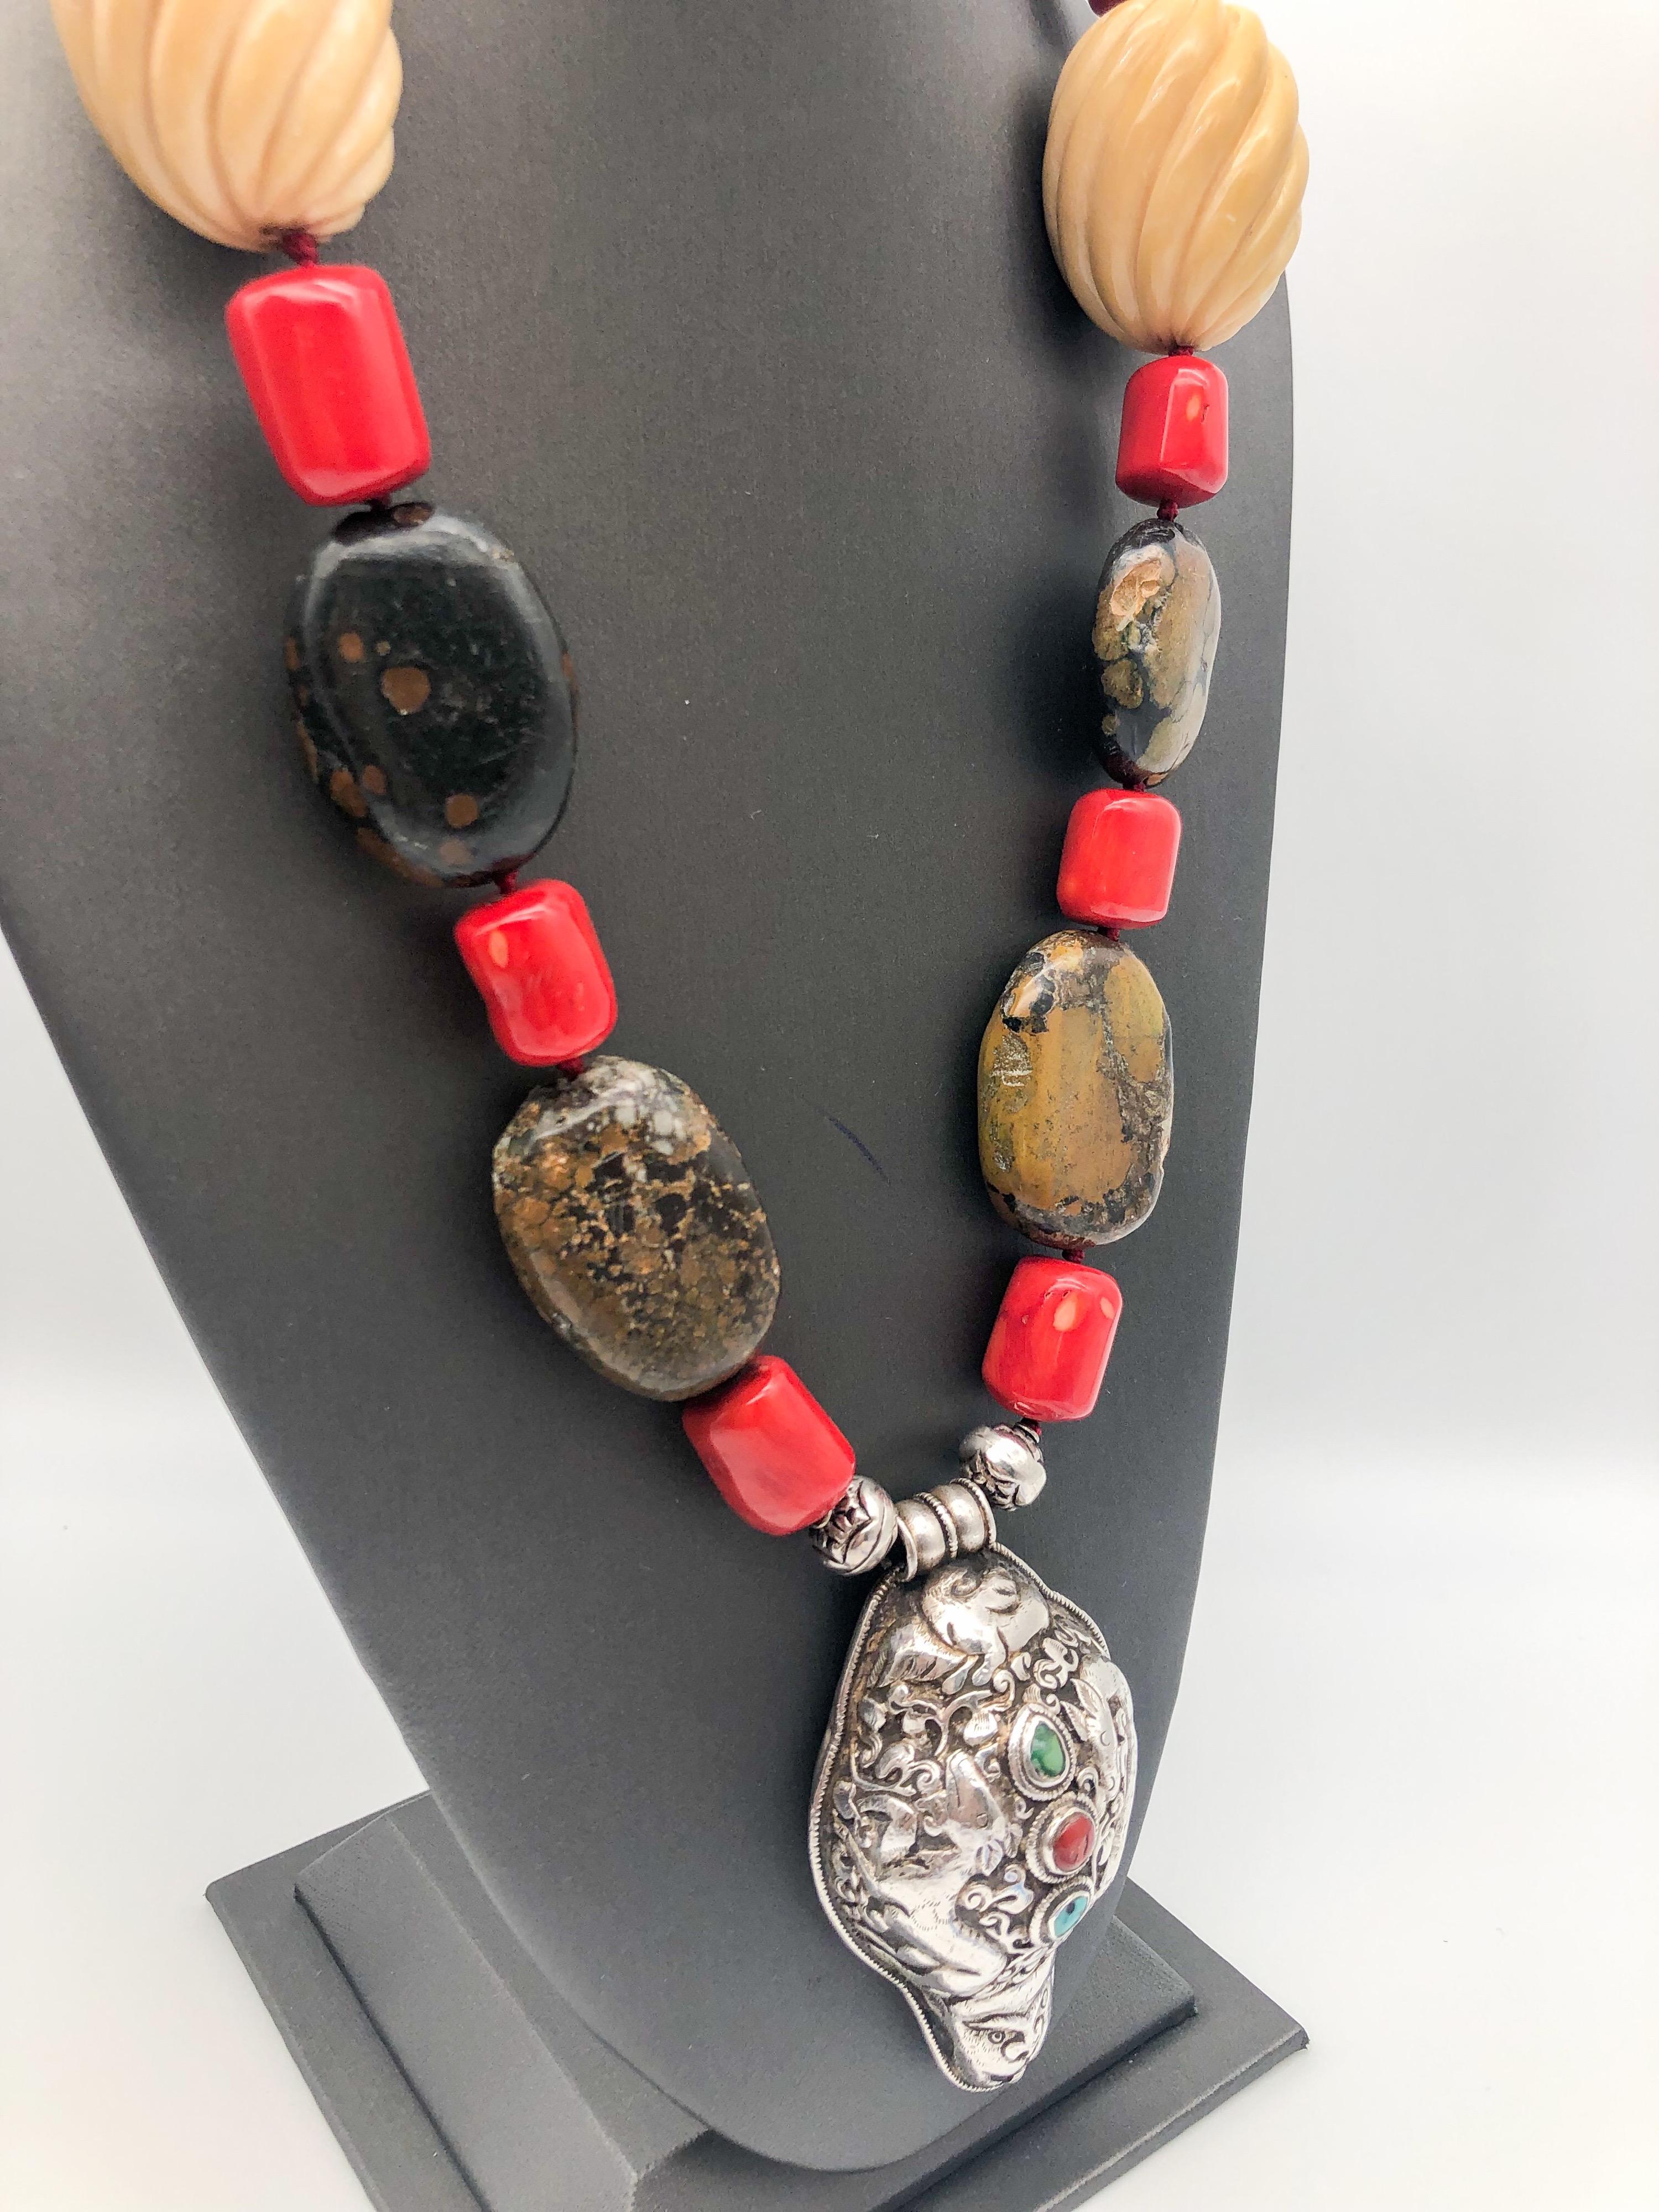 Introducing a stunning one-of-a-kind long necklace that is sure to turn heads and captivate attention. This dramatic piece boasts large brown turquoise plates, carved ox bone beads, Boulder opal, red Chinese lacquered bone, and heavy sterling silver